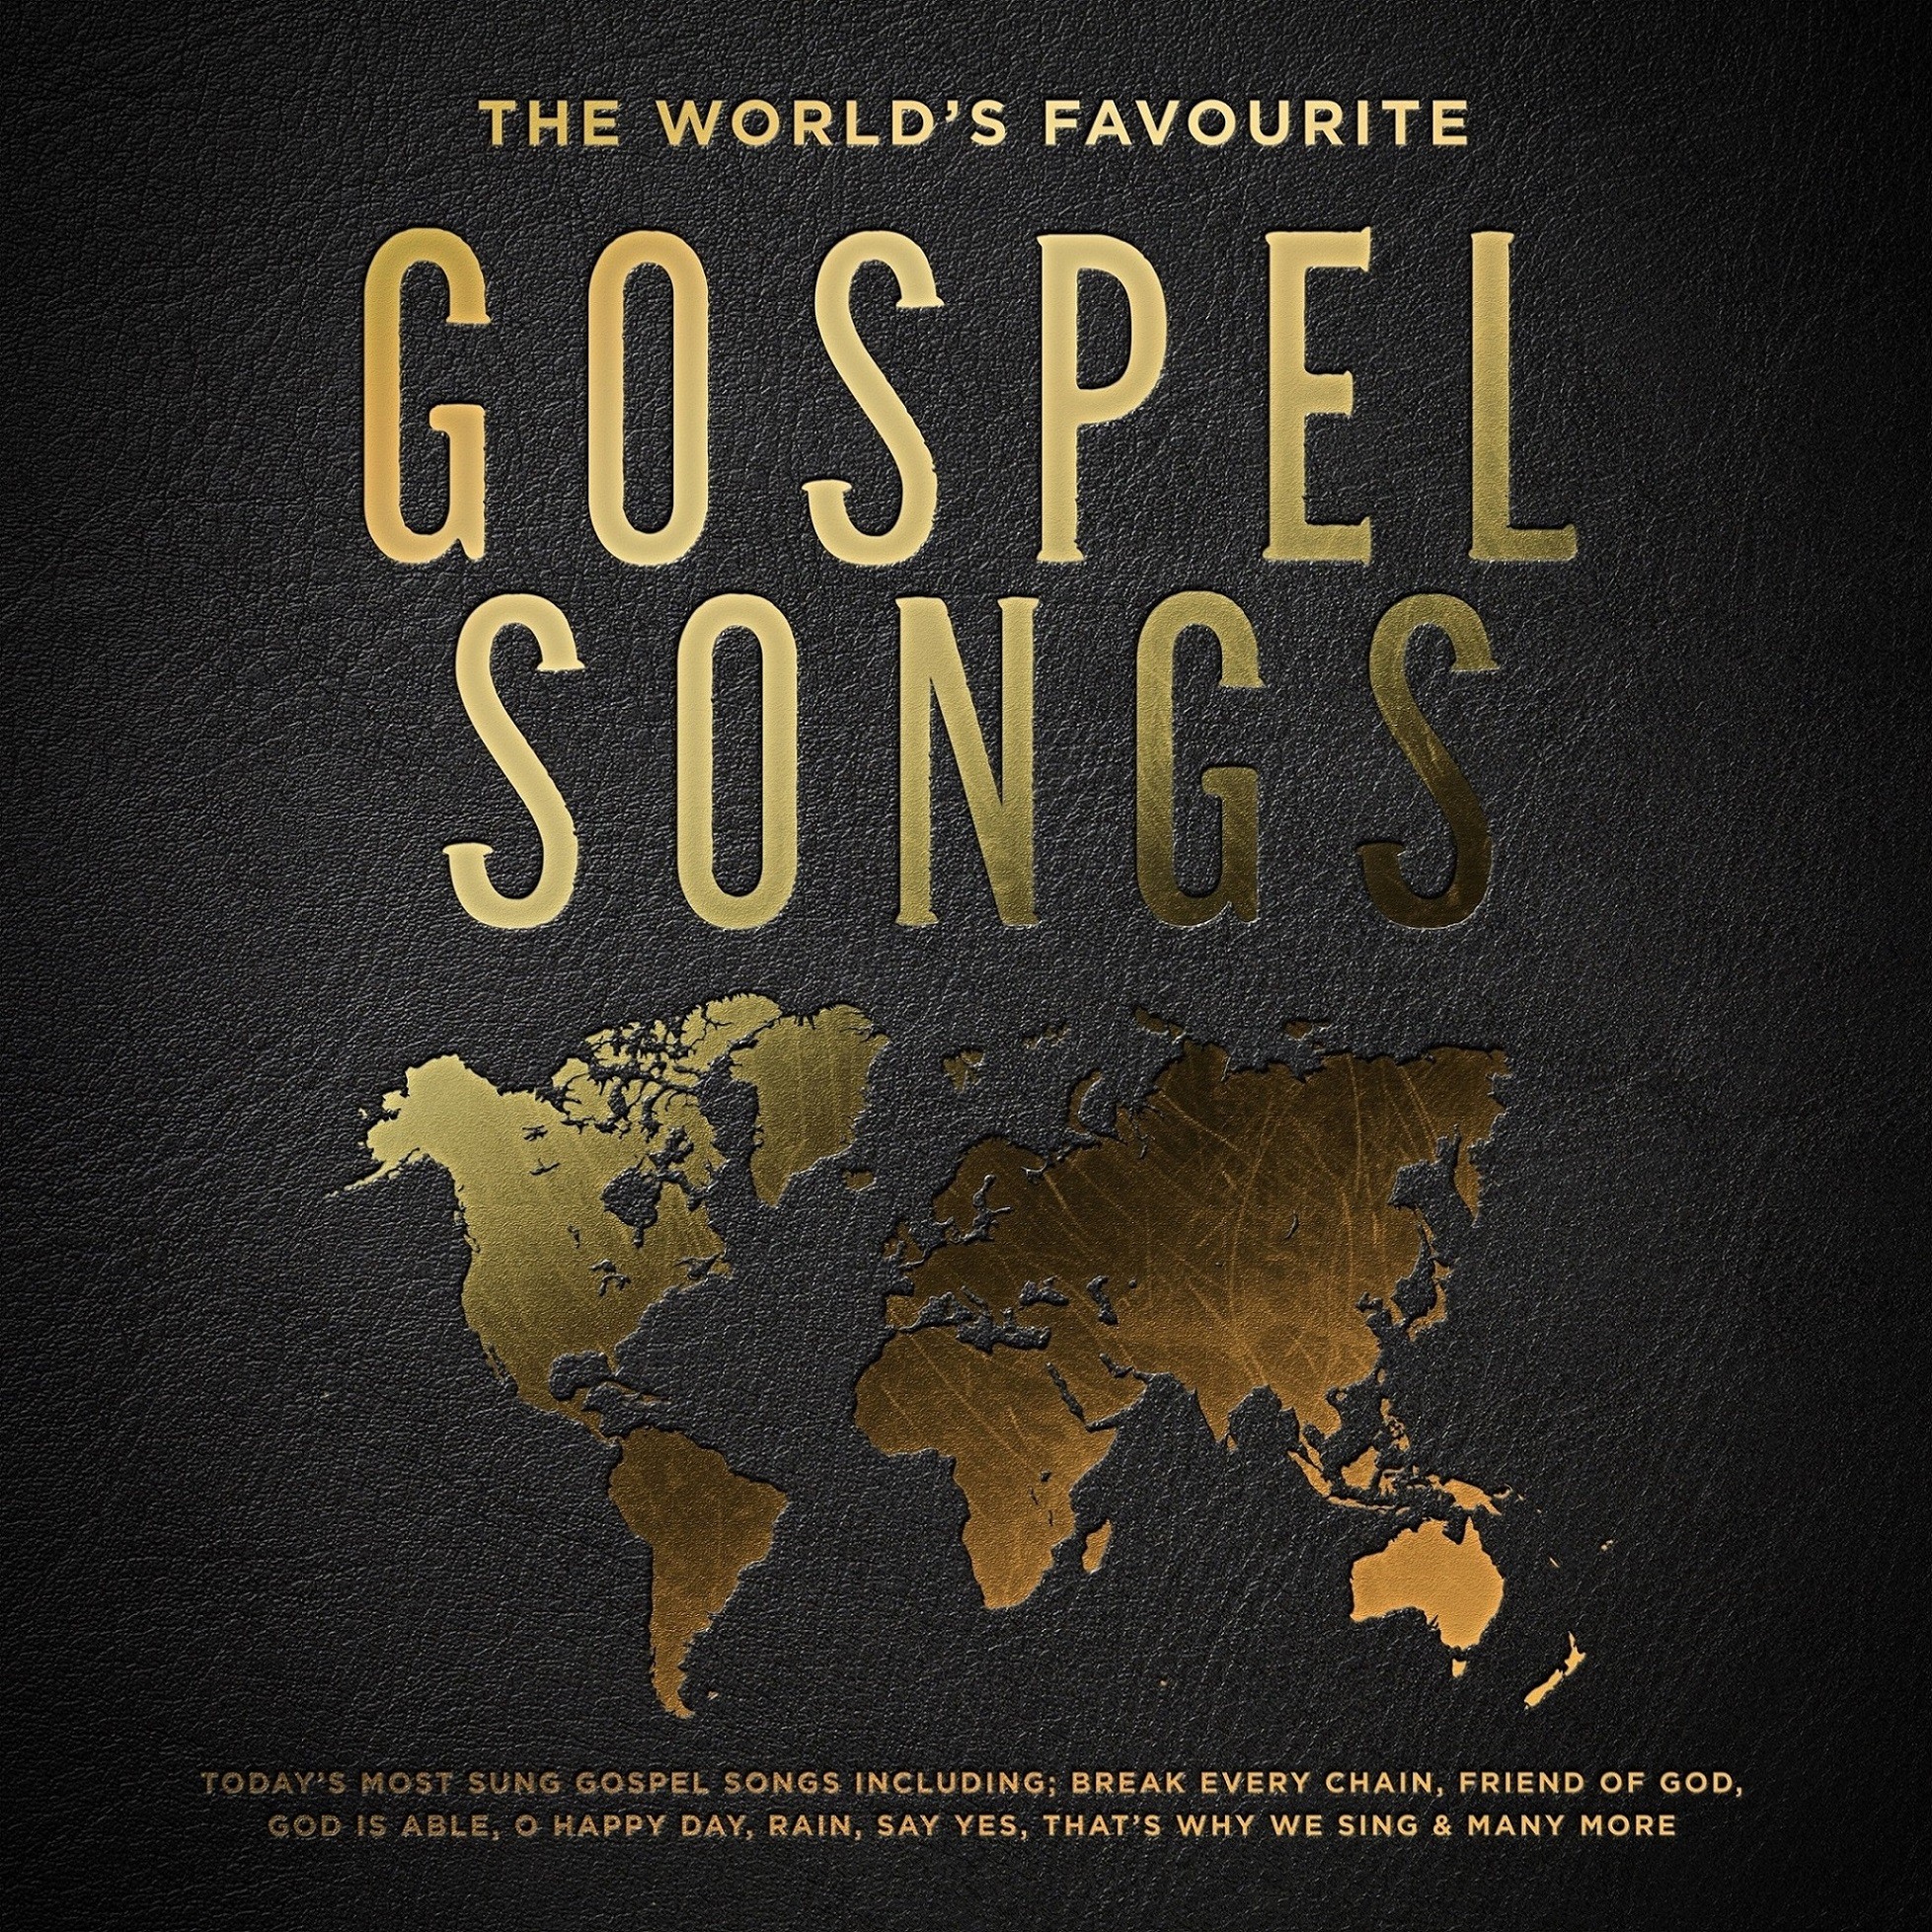 More information on The World's Favourite Gospel Songs 3 CD